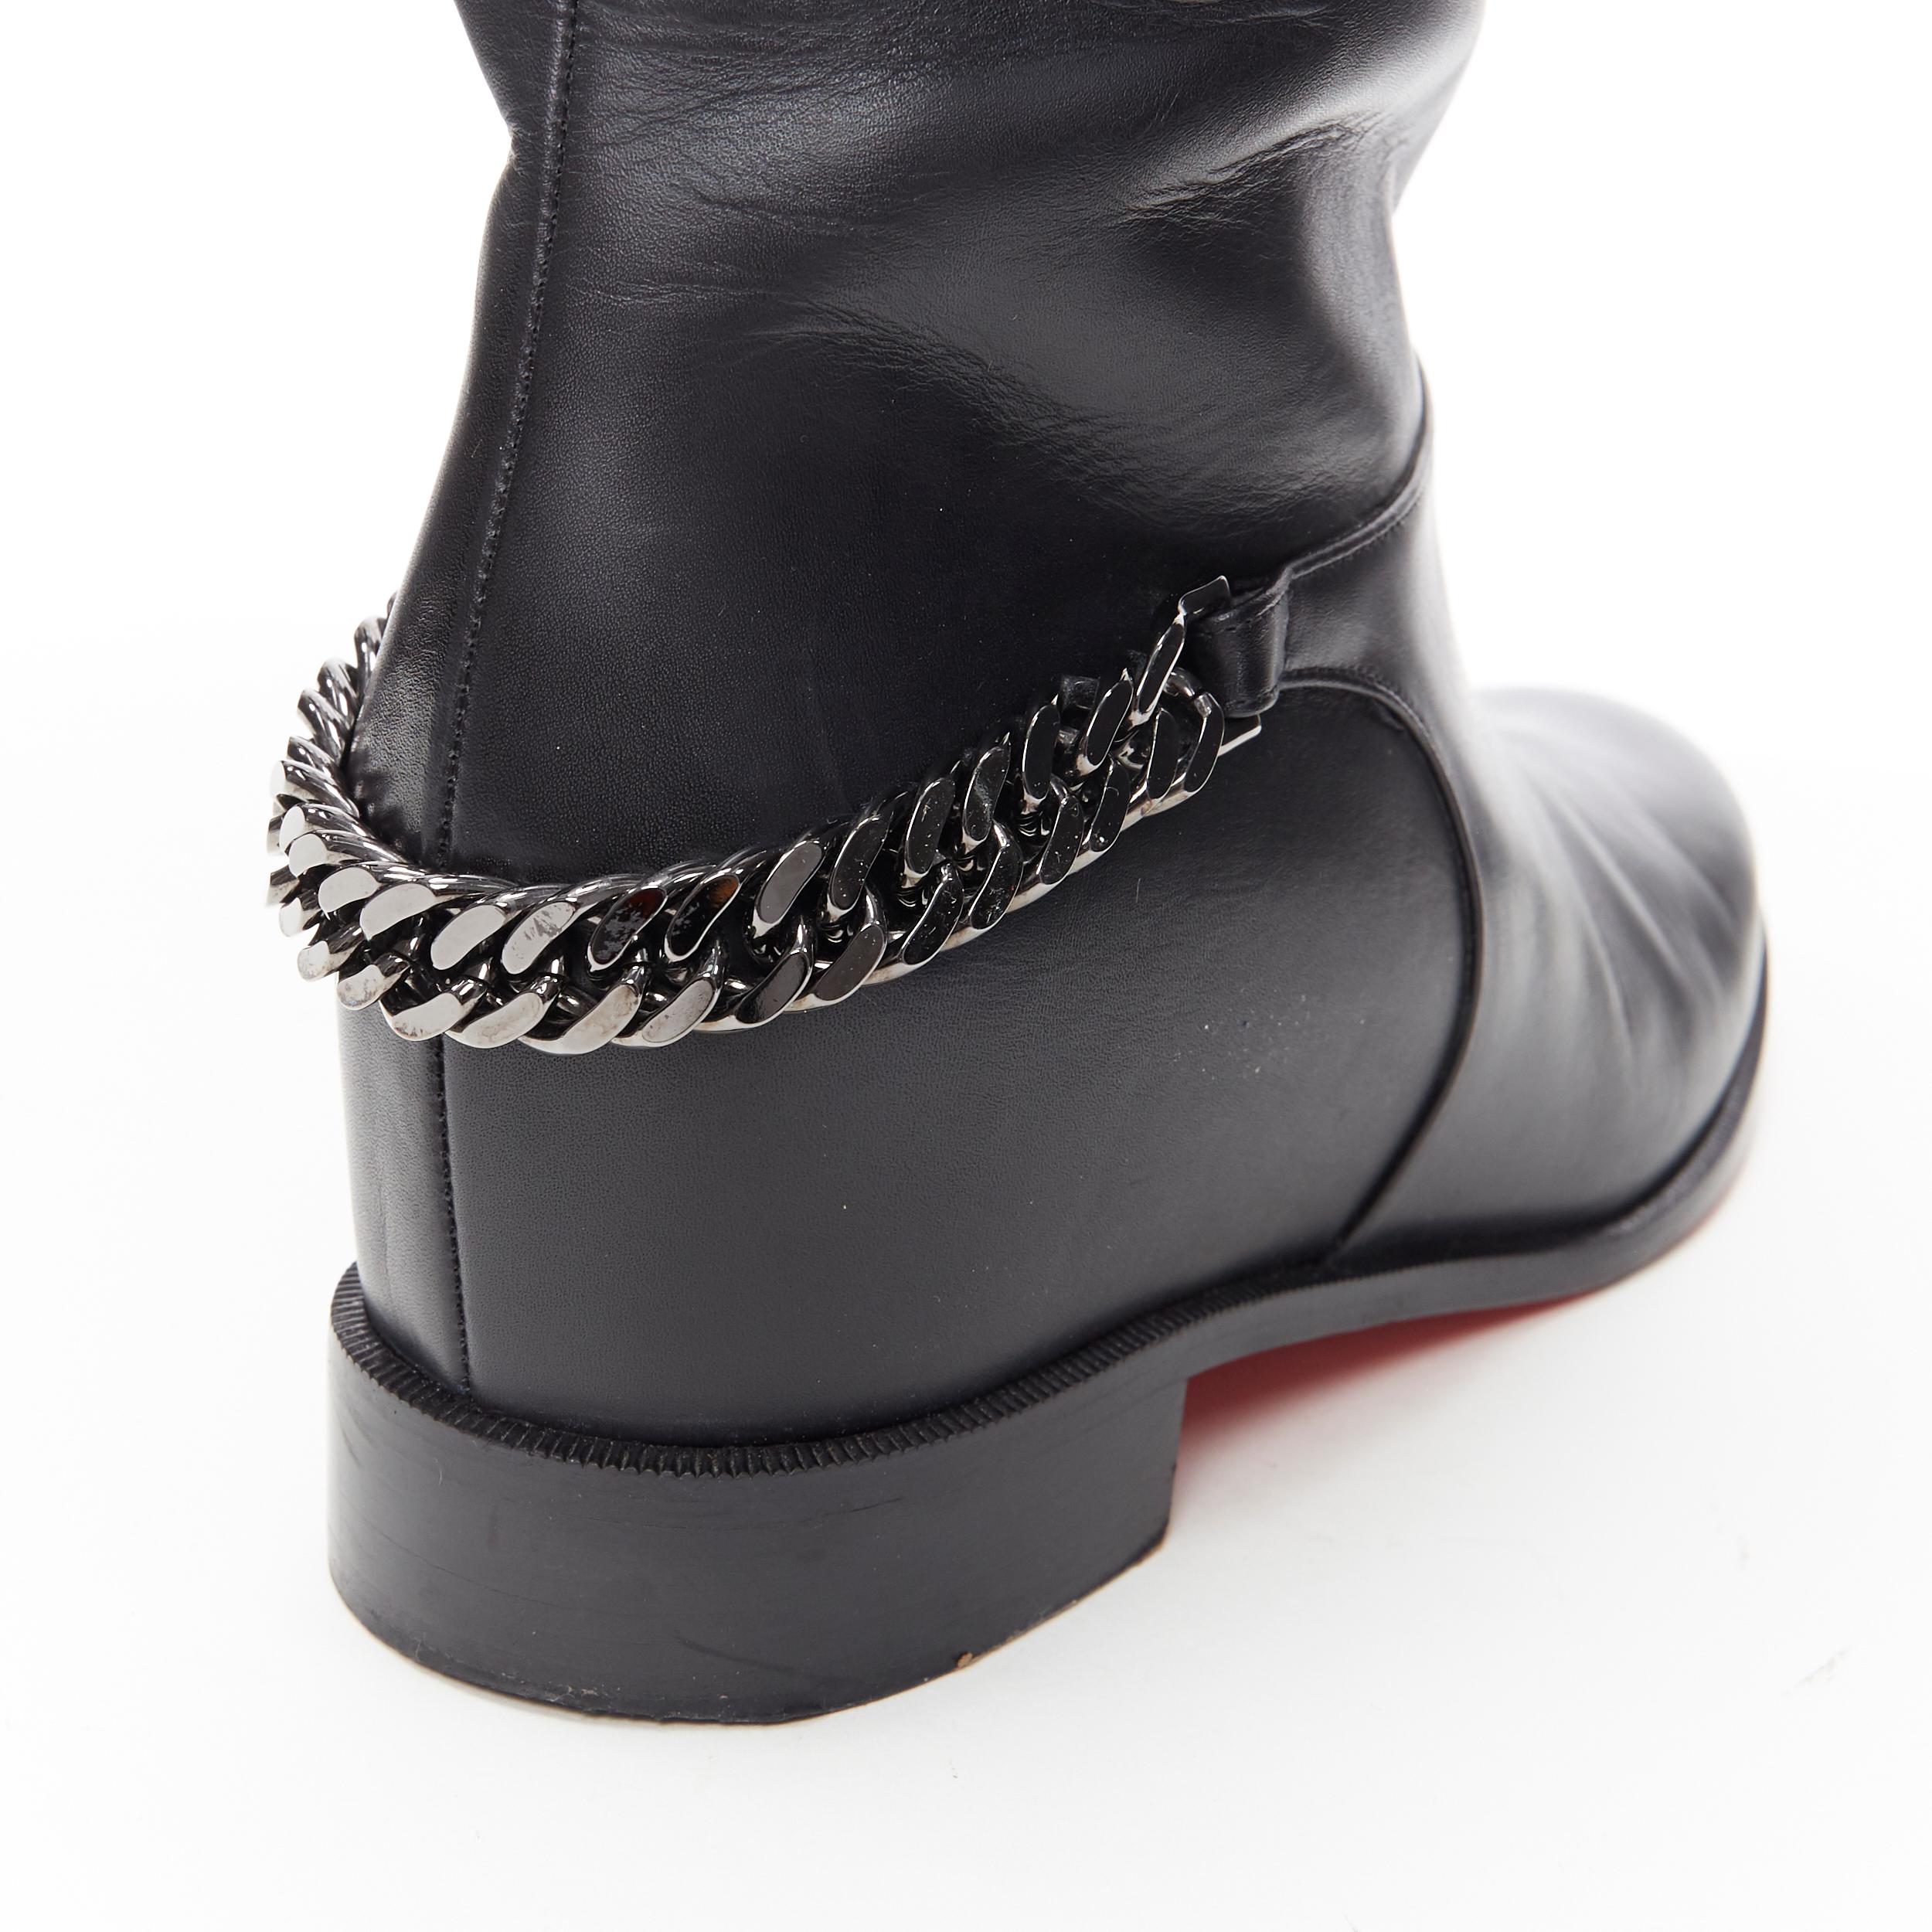 CHRISTIAN LOUBOUTIN Cate black leather silver chain heel pull on tall boot EU39
Brand: Christian Louboutin
Designer: Christian Louboutin
Model Name / Style: Cate
Material: Leather
Color: Black
Pattern: Solid
Closure: Pull on
Extra Detail: Low (1-1.9